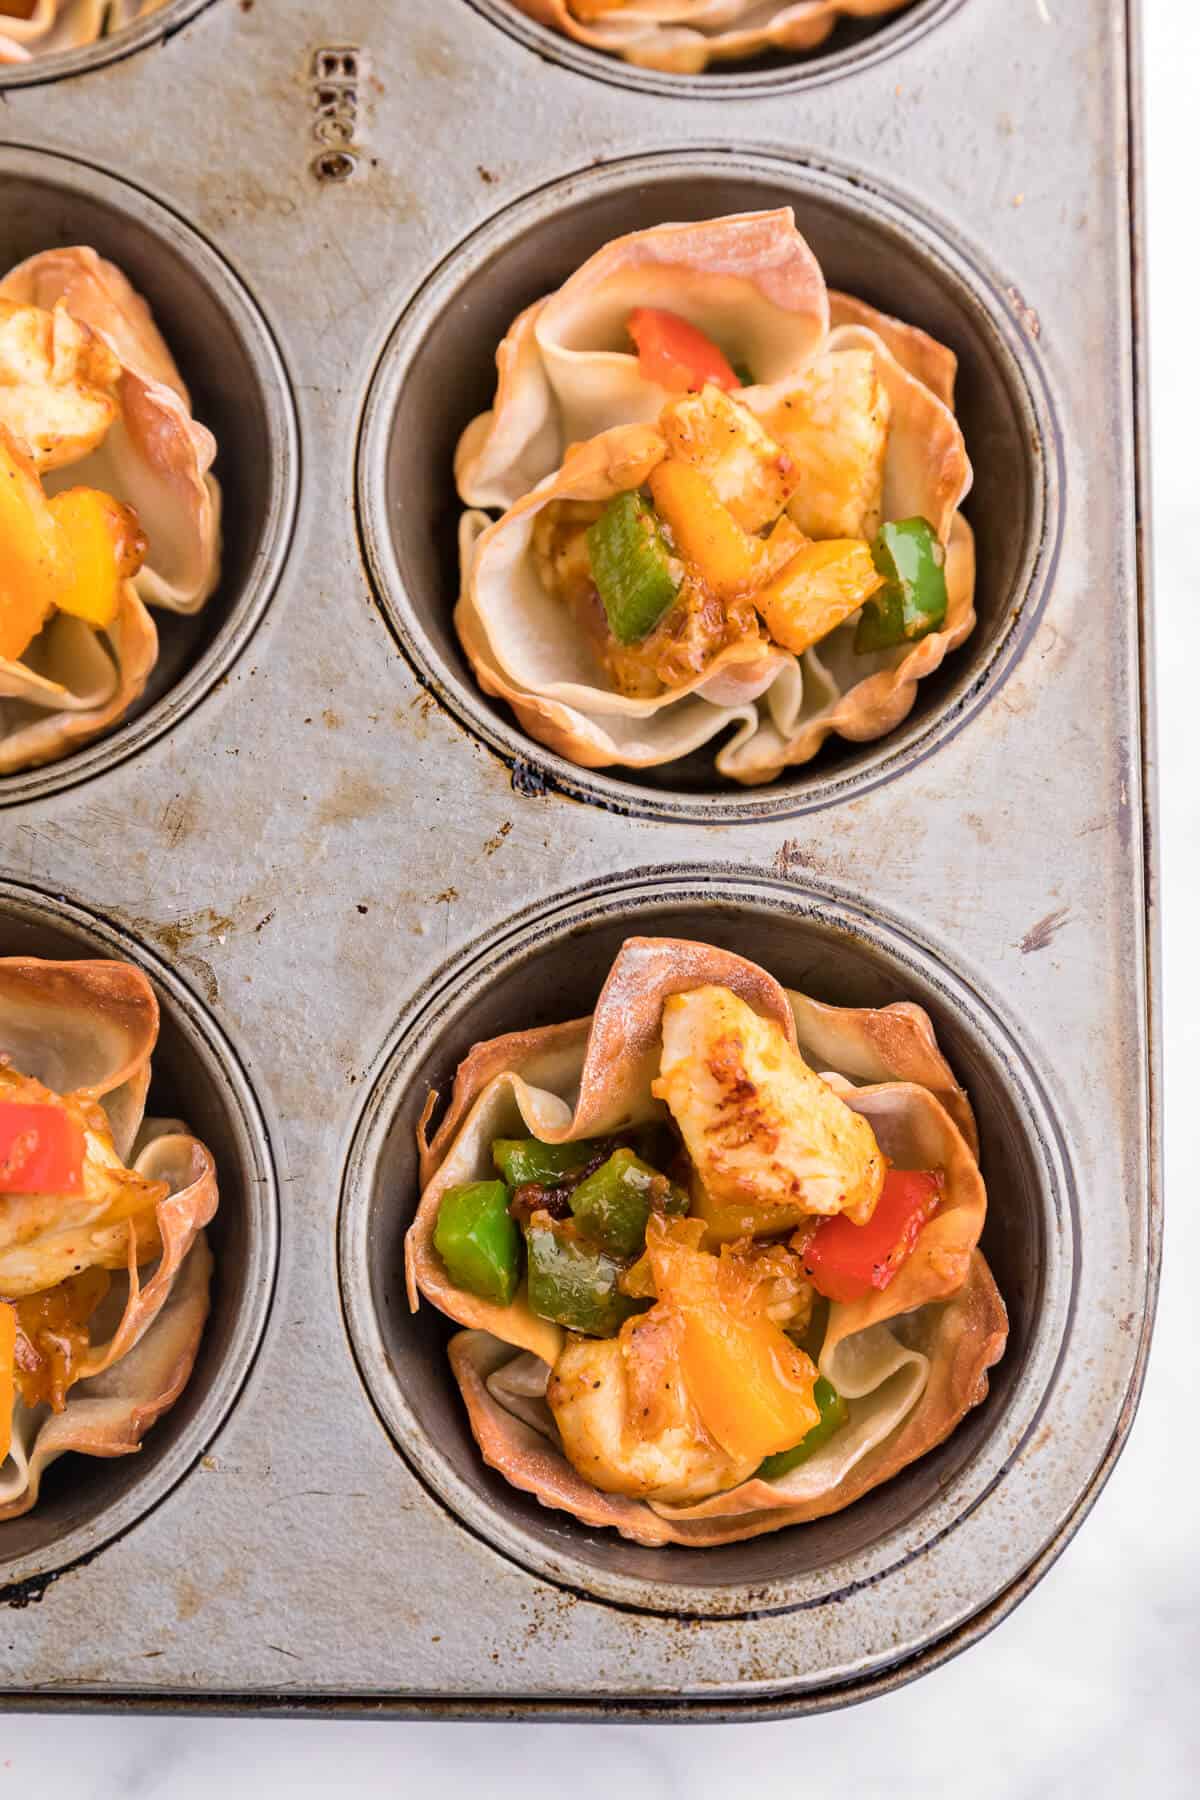 Chicken Fajita Wonton Cups - A little East, a little West. These appetizer cups are perfect for entertaining with a festive Mexican filling in a crunchy wonton.